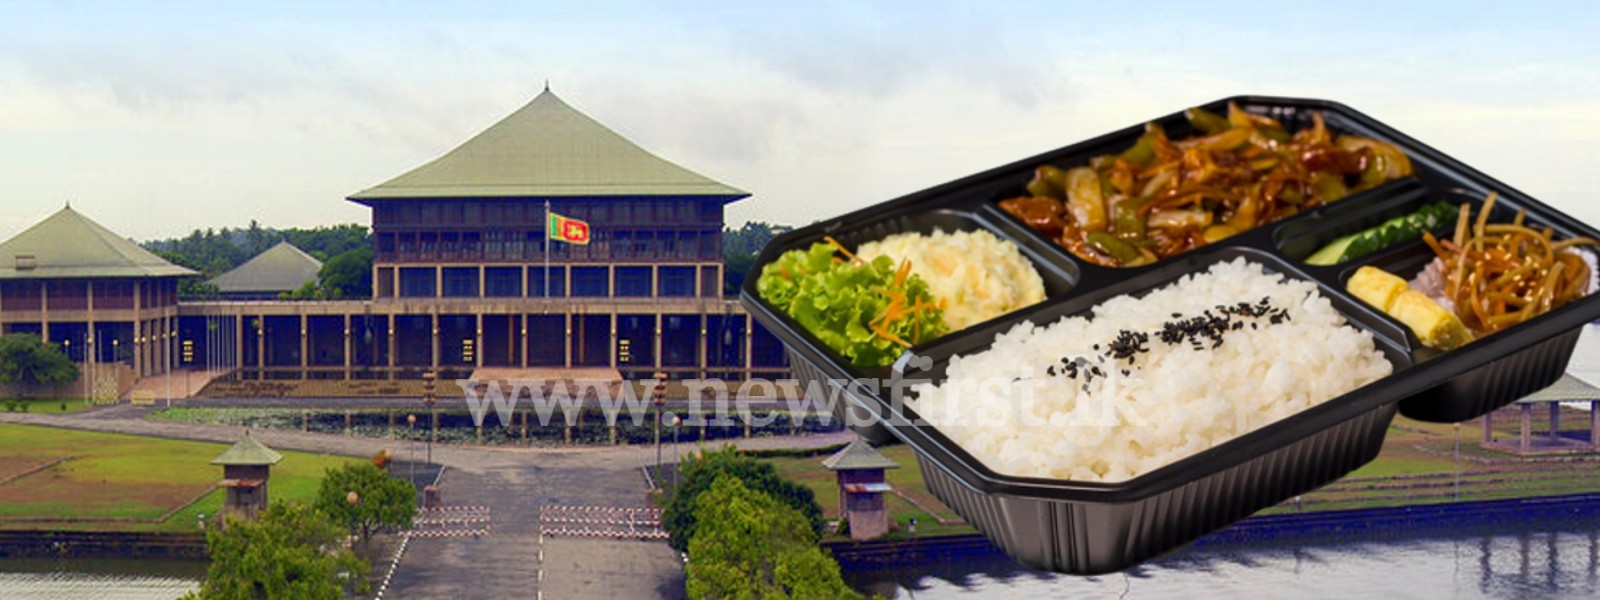 SLPP MPs want Parliament Canteen closed; Marikkar requests speaker to reveal actual daily cost in Parliament